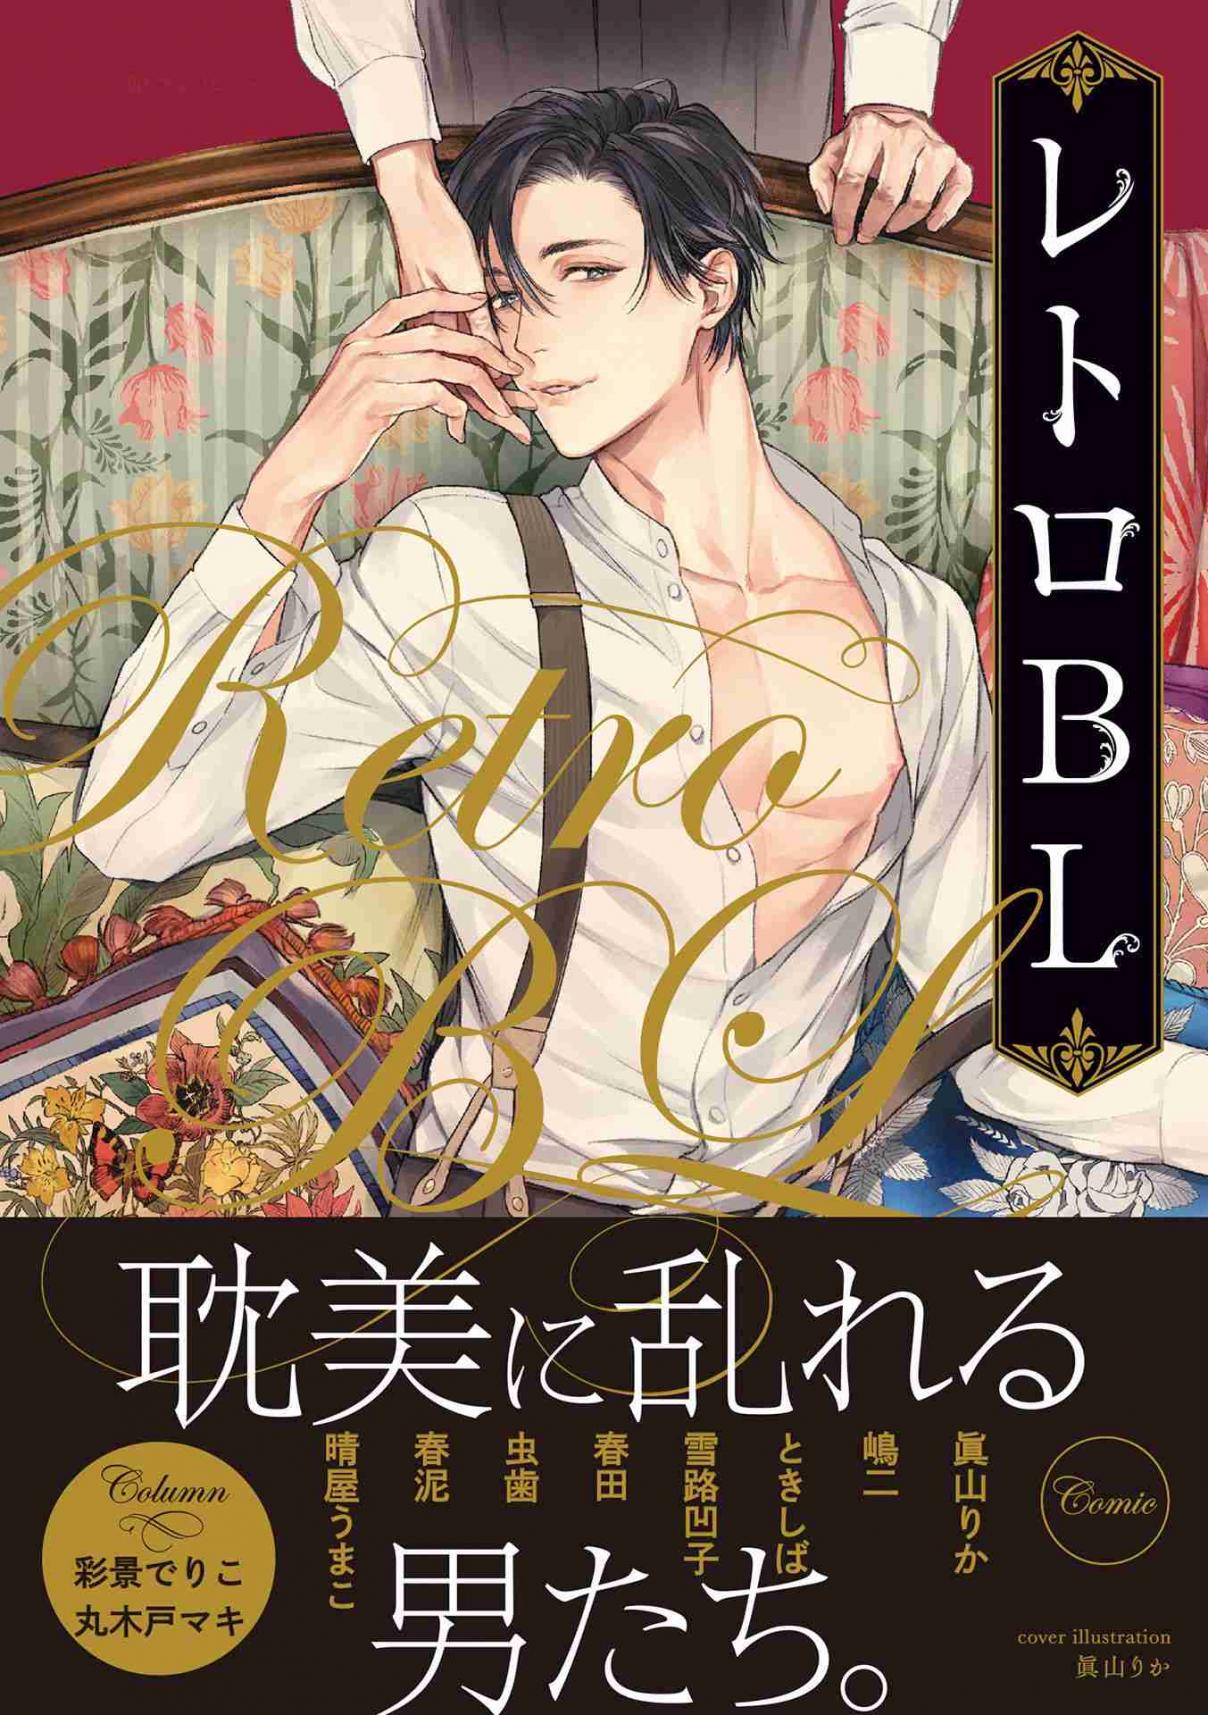 Retro BL (Anthology) Vol. 1 Ch. 1 The First Star in the Box (by Shimaji)